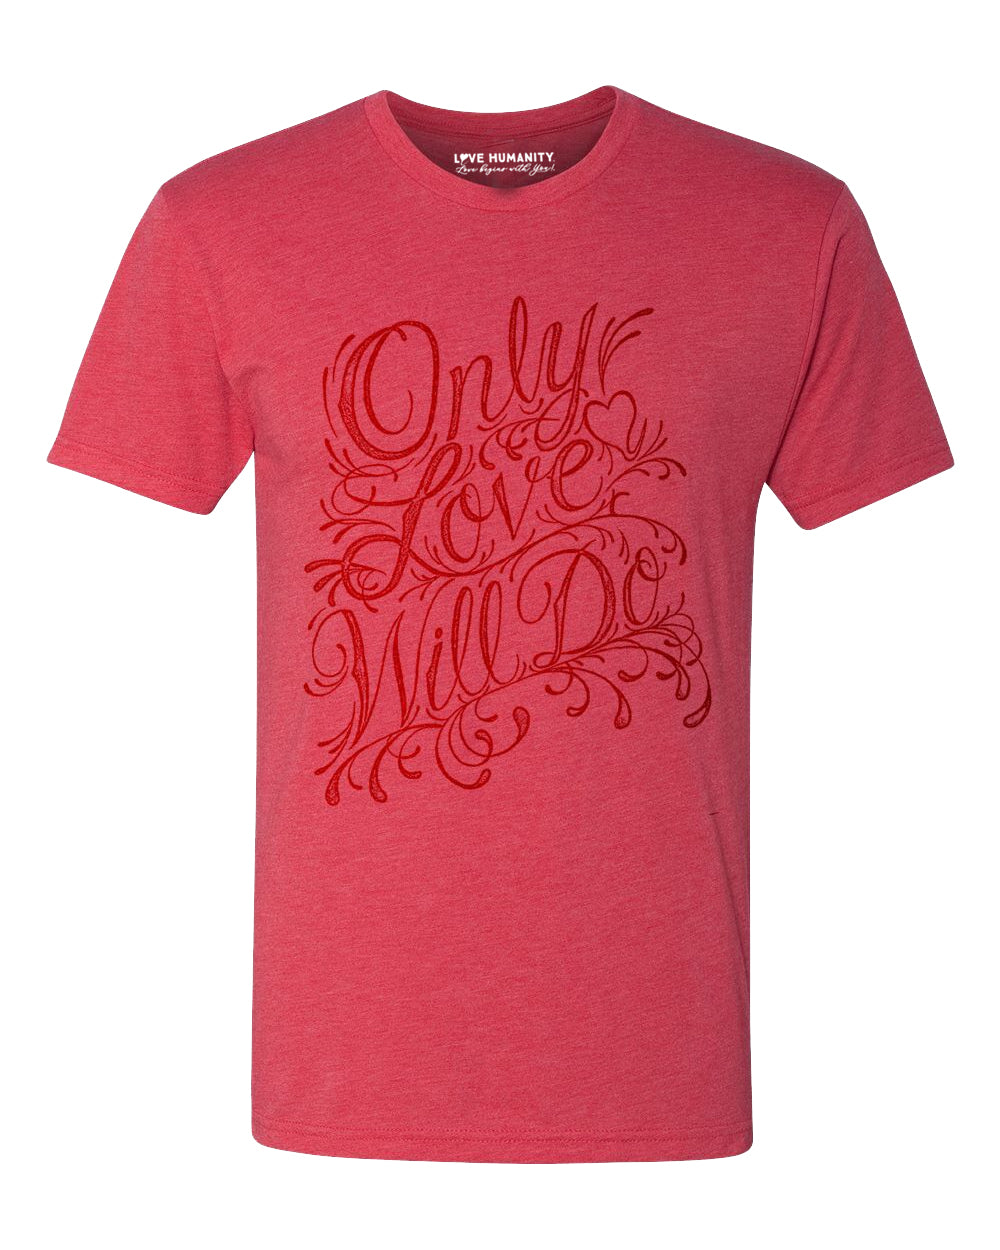 Only Love Will Do™ Premium TriBlend T